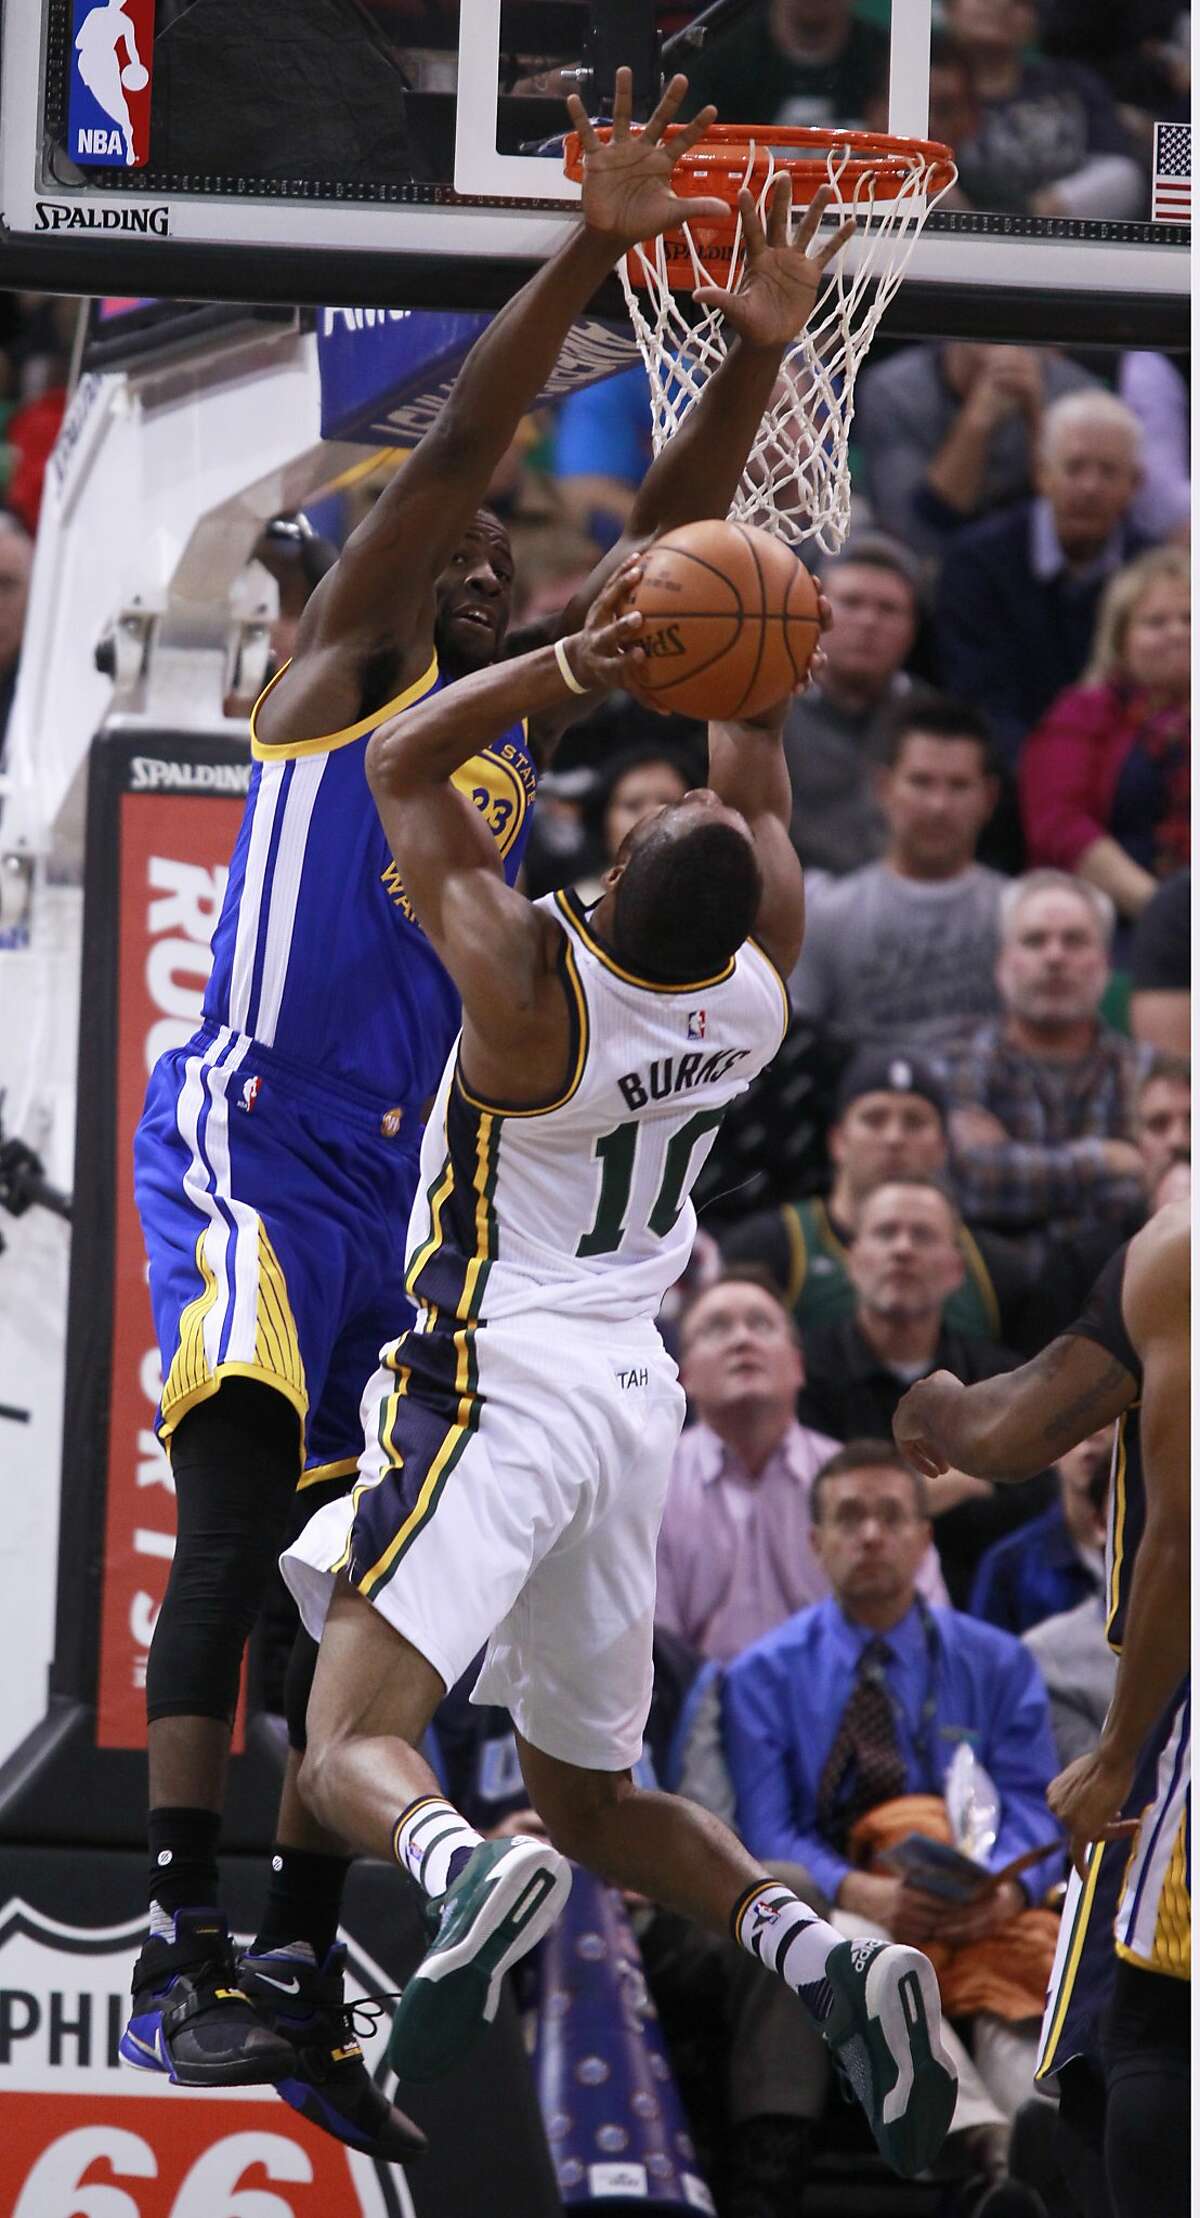 Guard Alec Burks #10 of the Utah Jazz tries to shoot over forward Draymond Green #23 of the Golden State Warriors during the first half of an NBA game November 30, 2014 at Vivint Smart Home Arena in Salt Lake City, Utah.